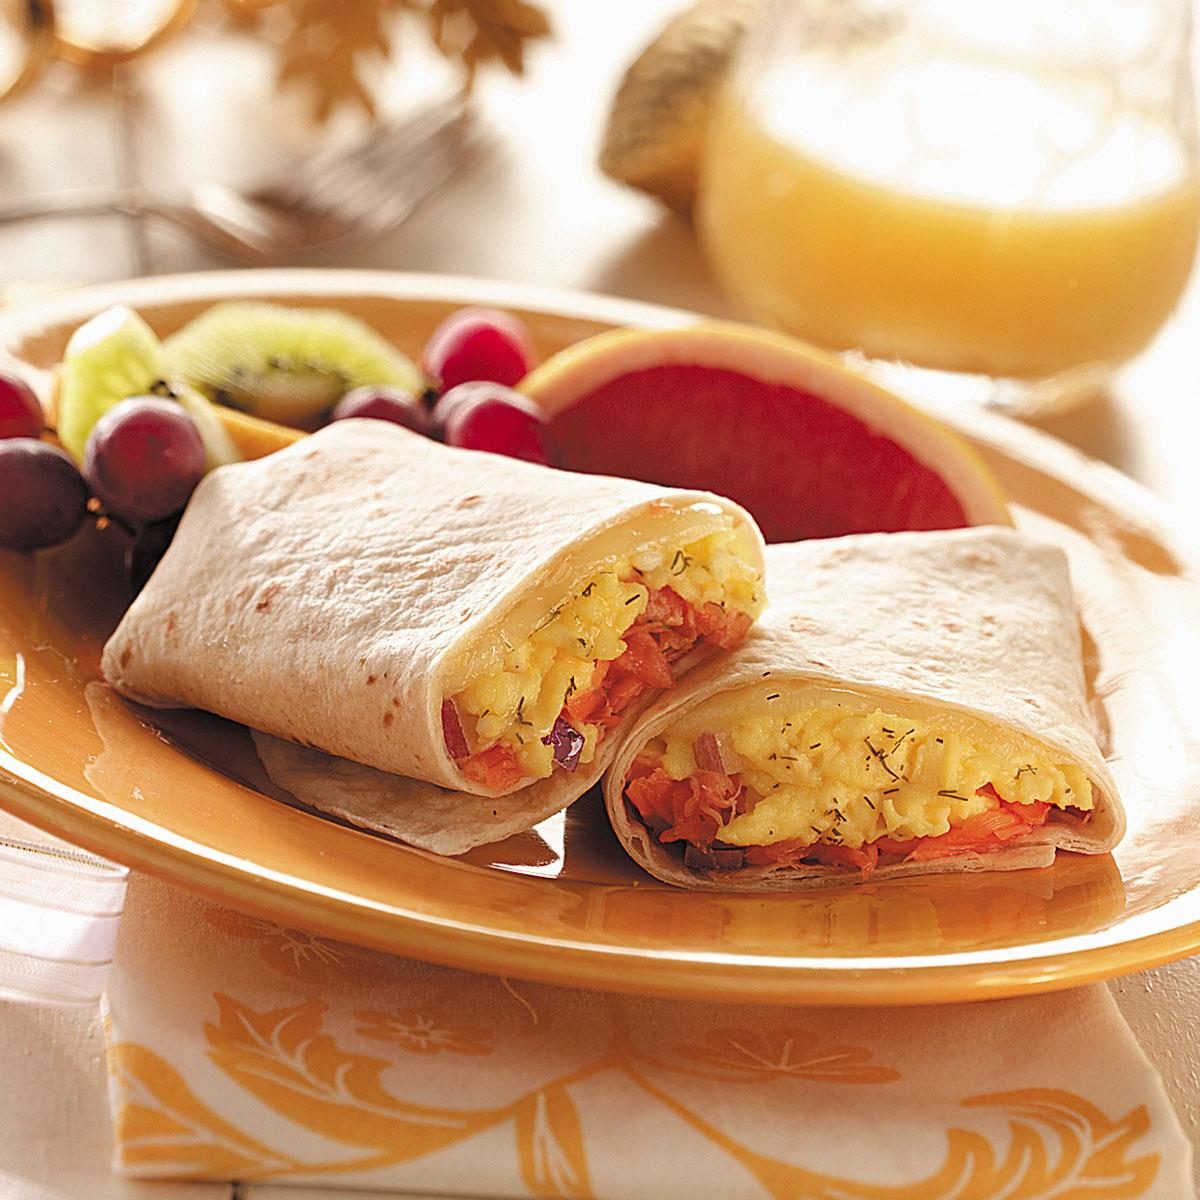 https://www.tasteofhome.com/wp-content/uploads/2018/01/Smoked-Salmon-and-Egg-Wraps_exps28814_CWC1597098D32_RMS-3.jpg